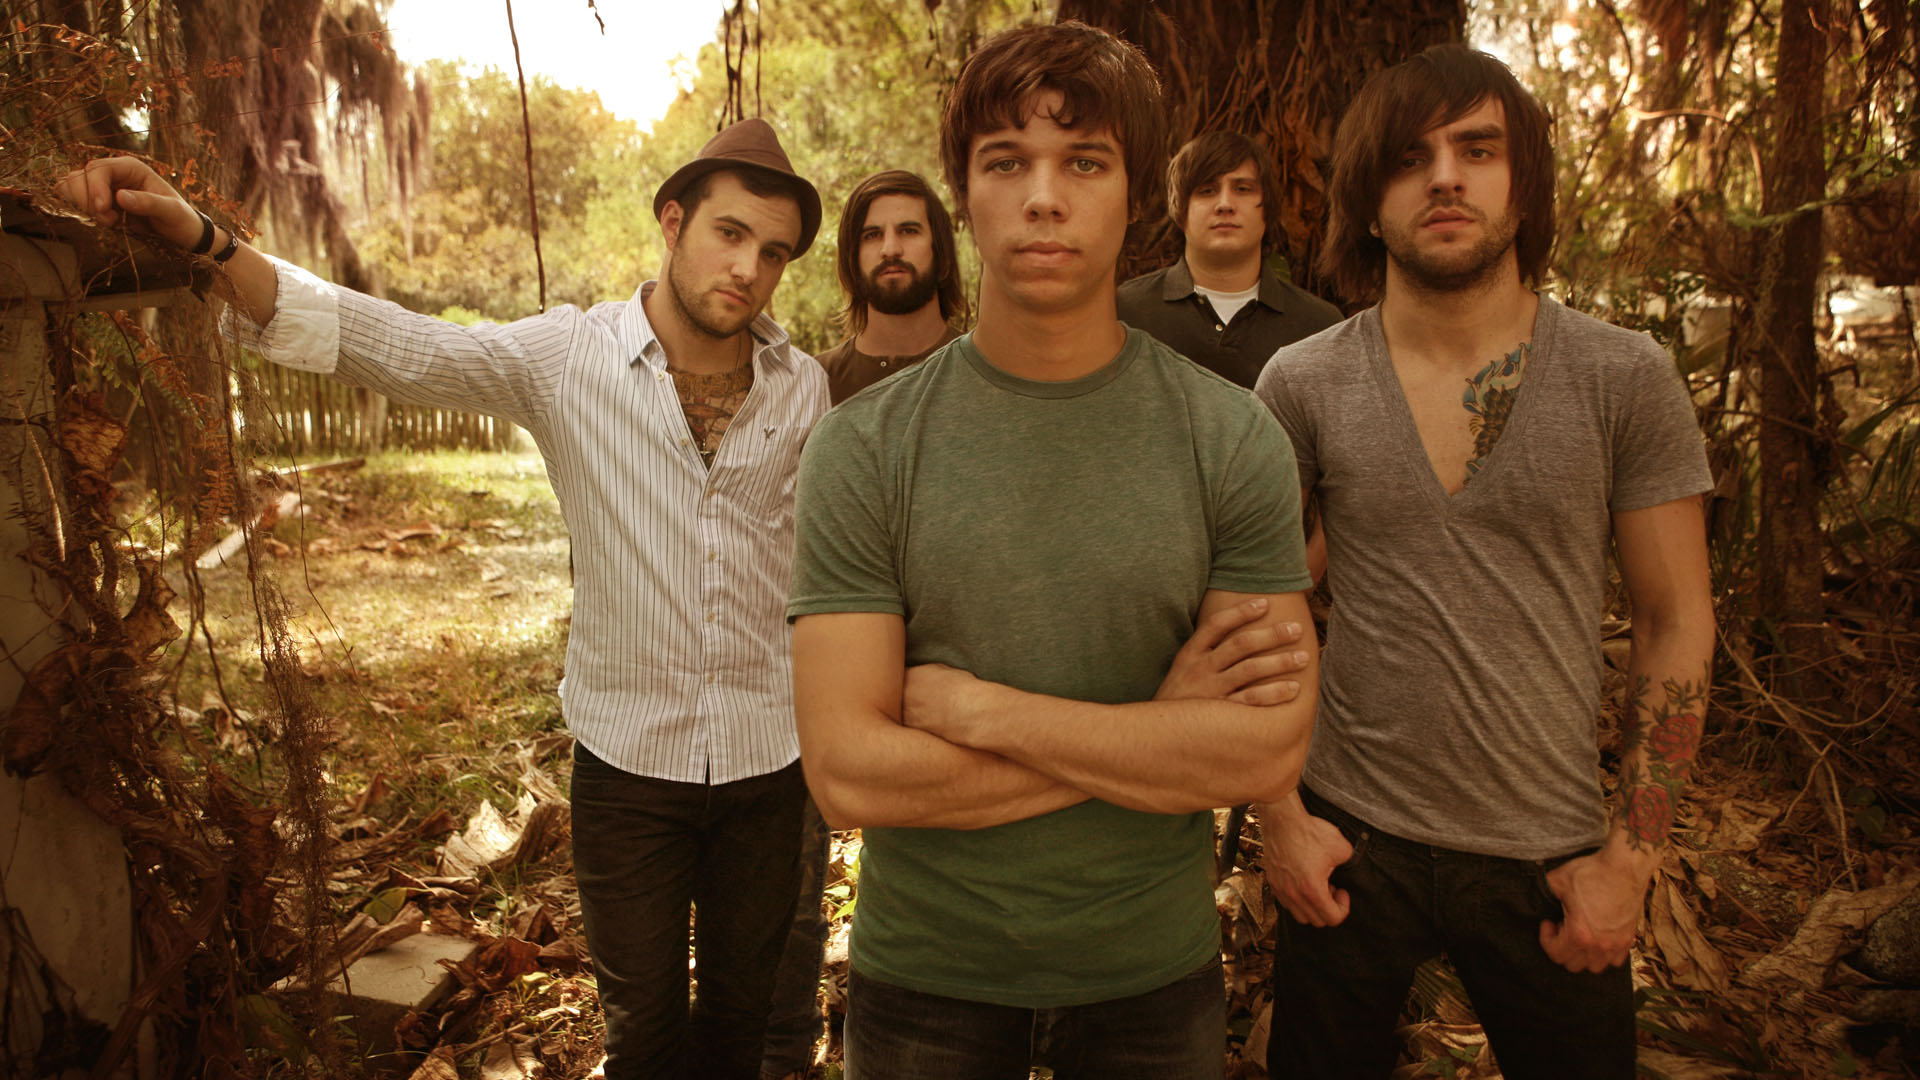 August Burns Red Backgrounds, Compatible - PC, Mobile, Gadgets| 1920x1080 px